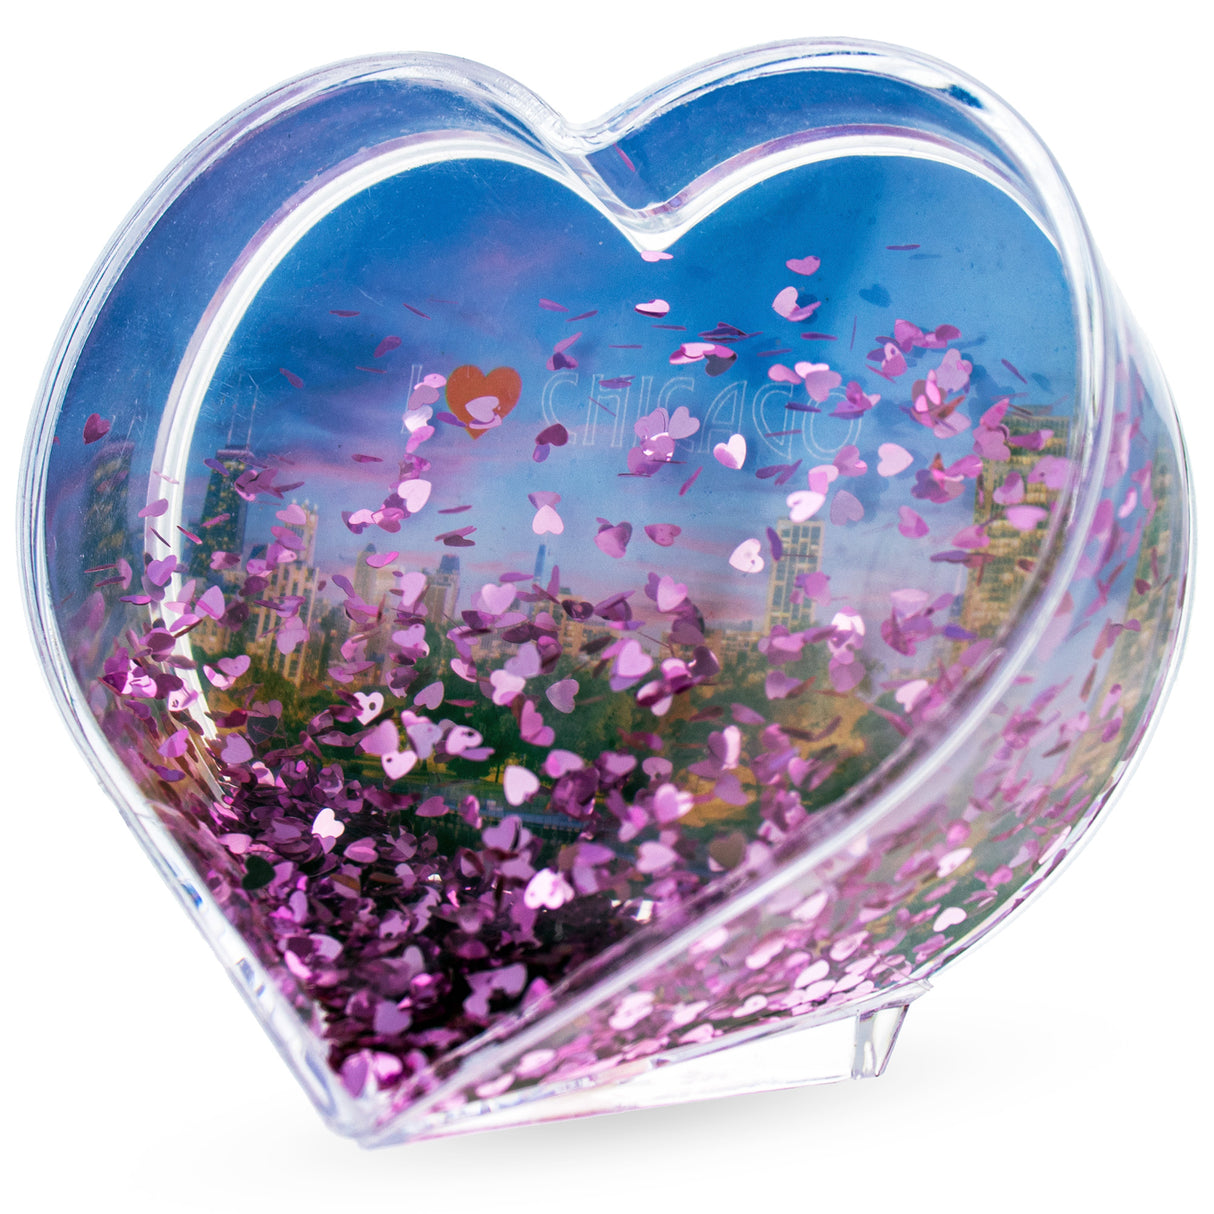 Chicago Love: Heart-Shaped Clear Acrylic Plastic Snow Globe Photo Frame in Clear color, Heart shape